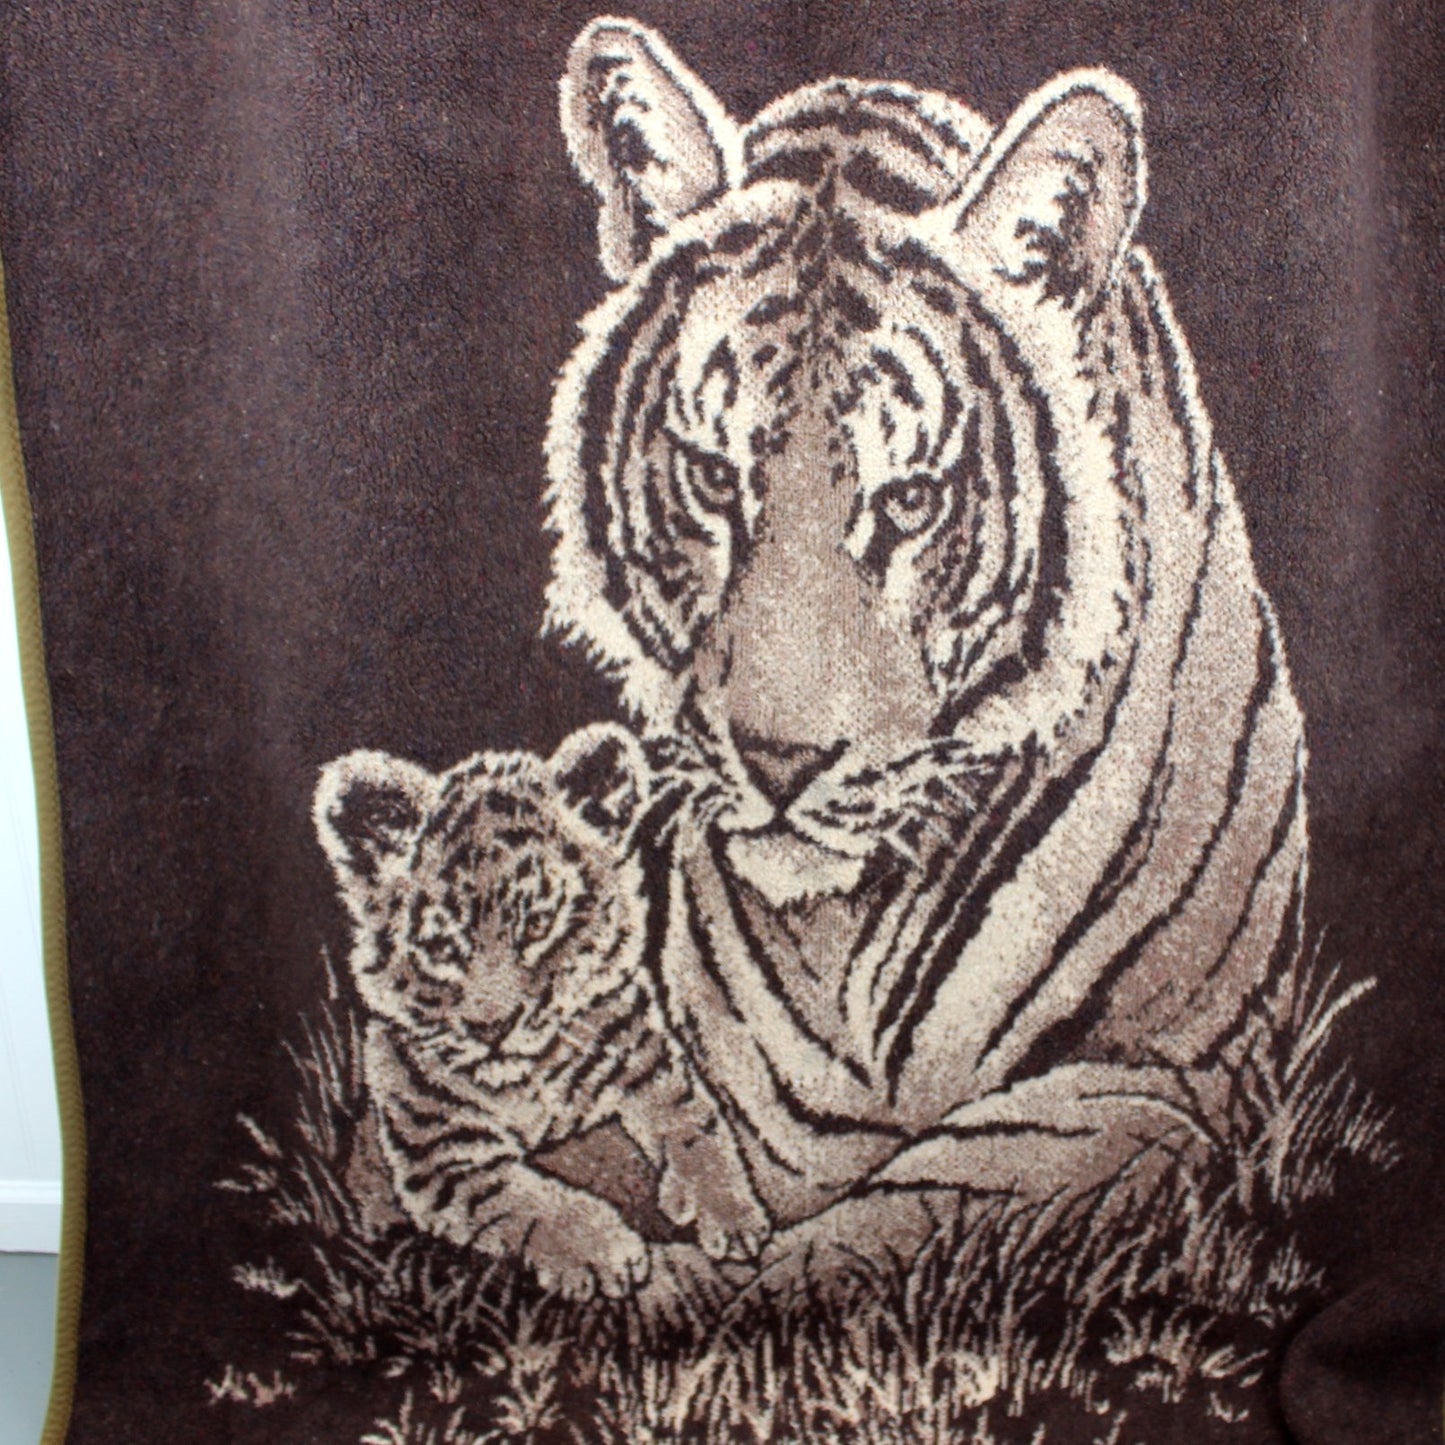 Acrylic Blanket Tiger Mother Cub Reversible Shades Brown 54" X 82" closer look at animals